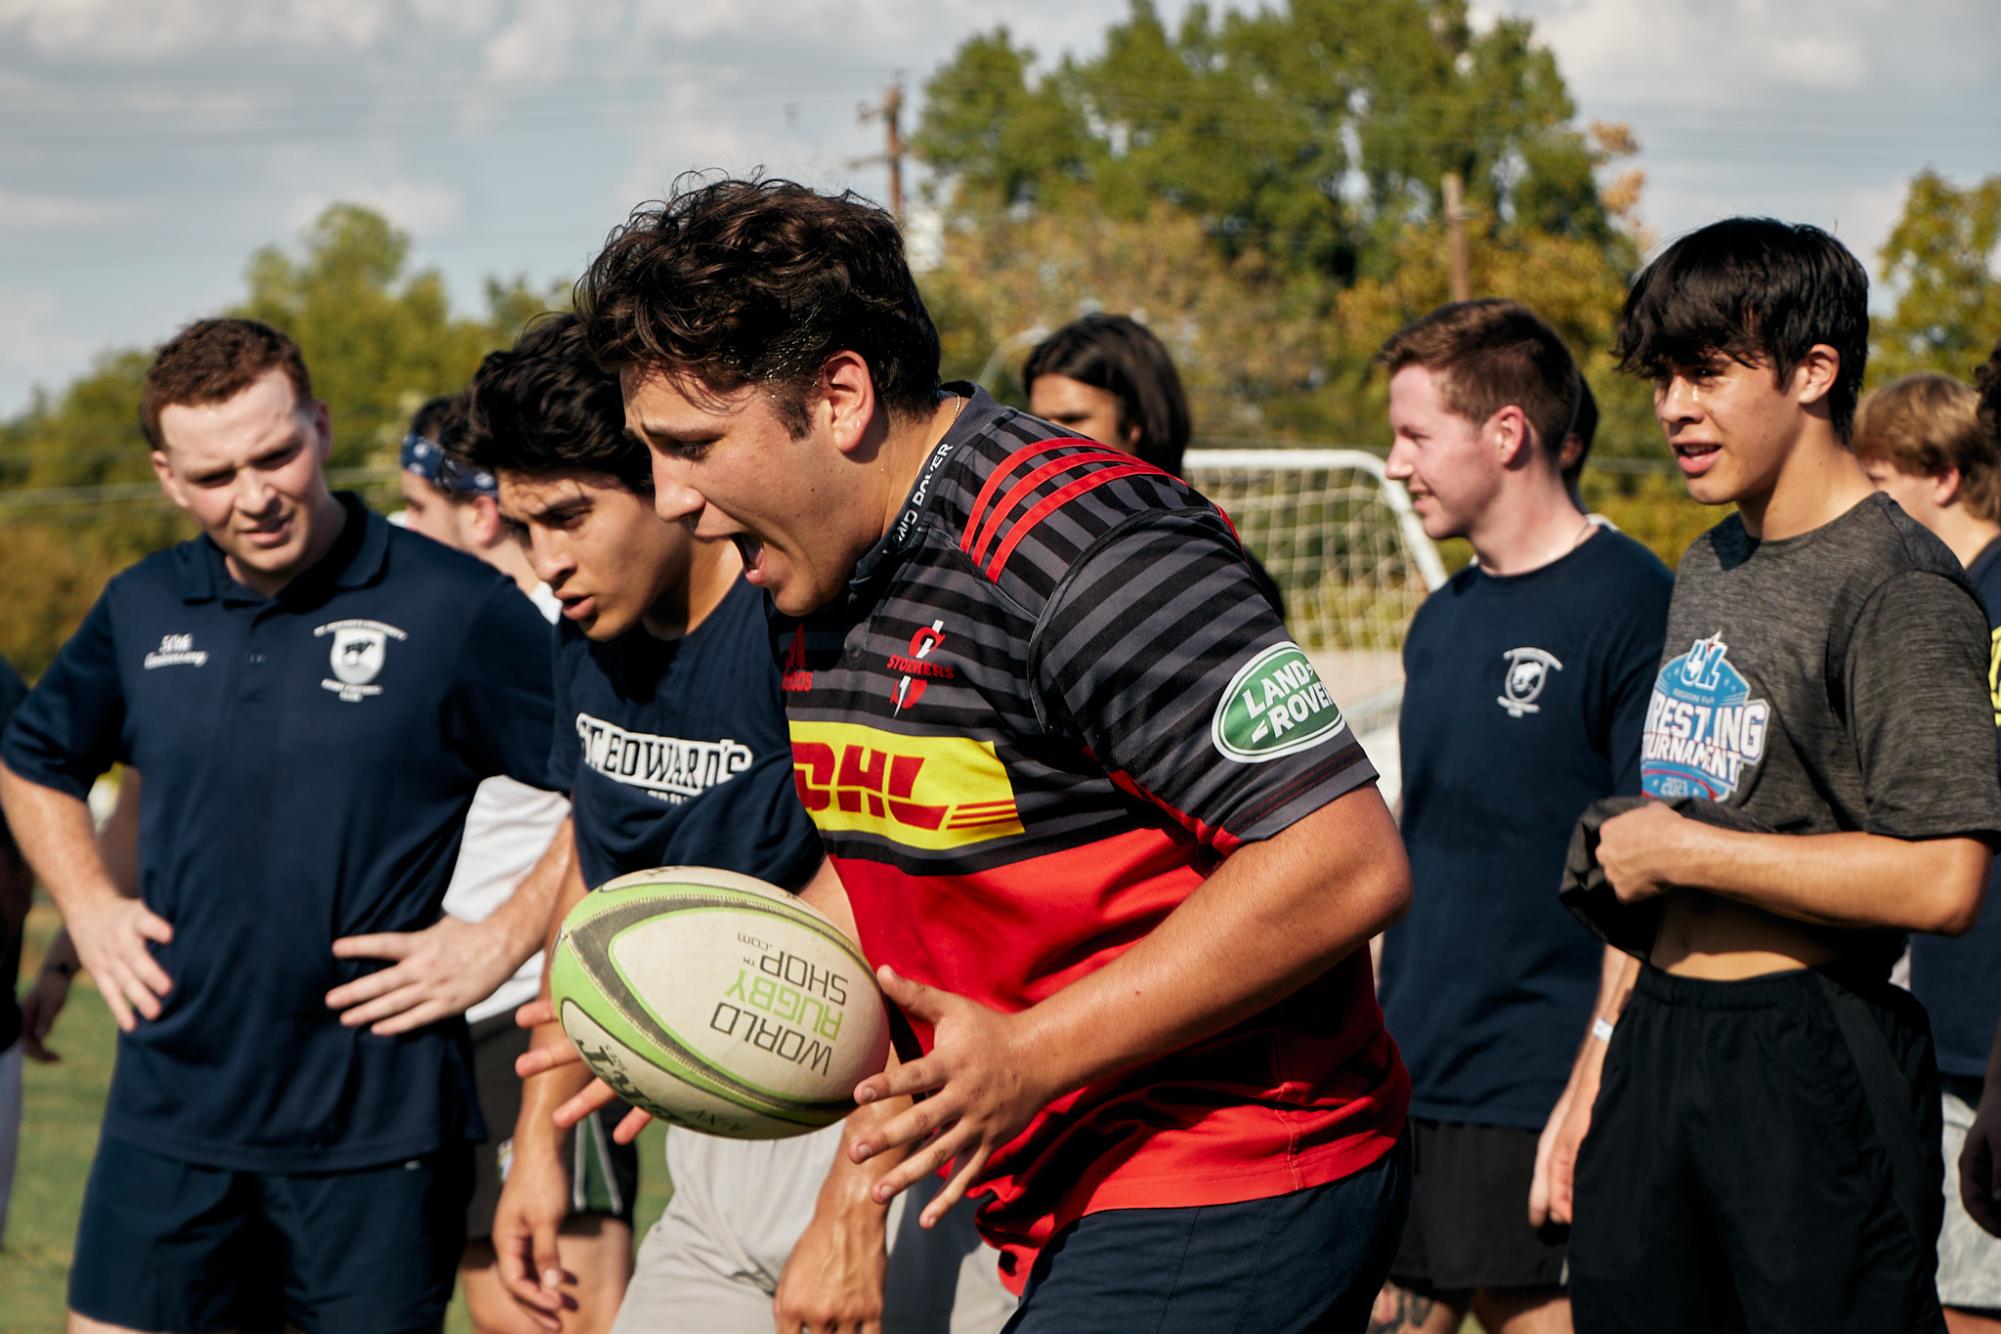 Club rugby focuses on the future under new president, captain